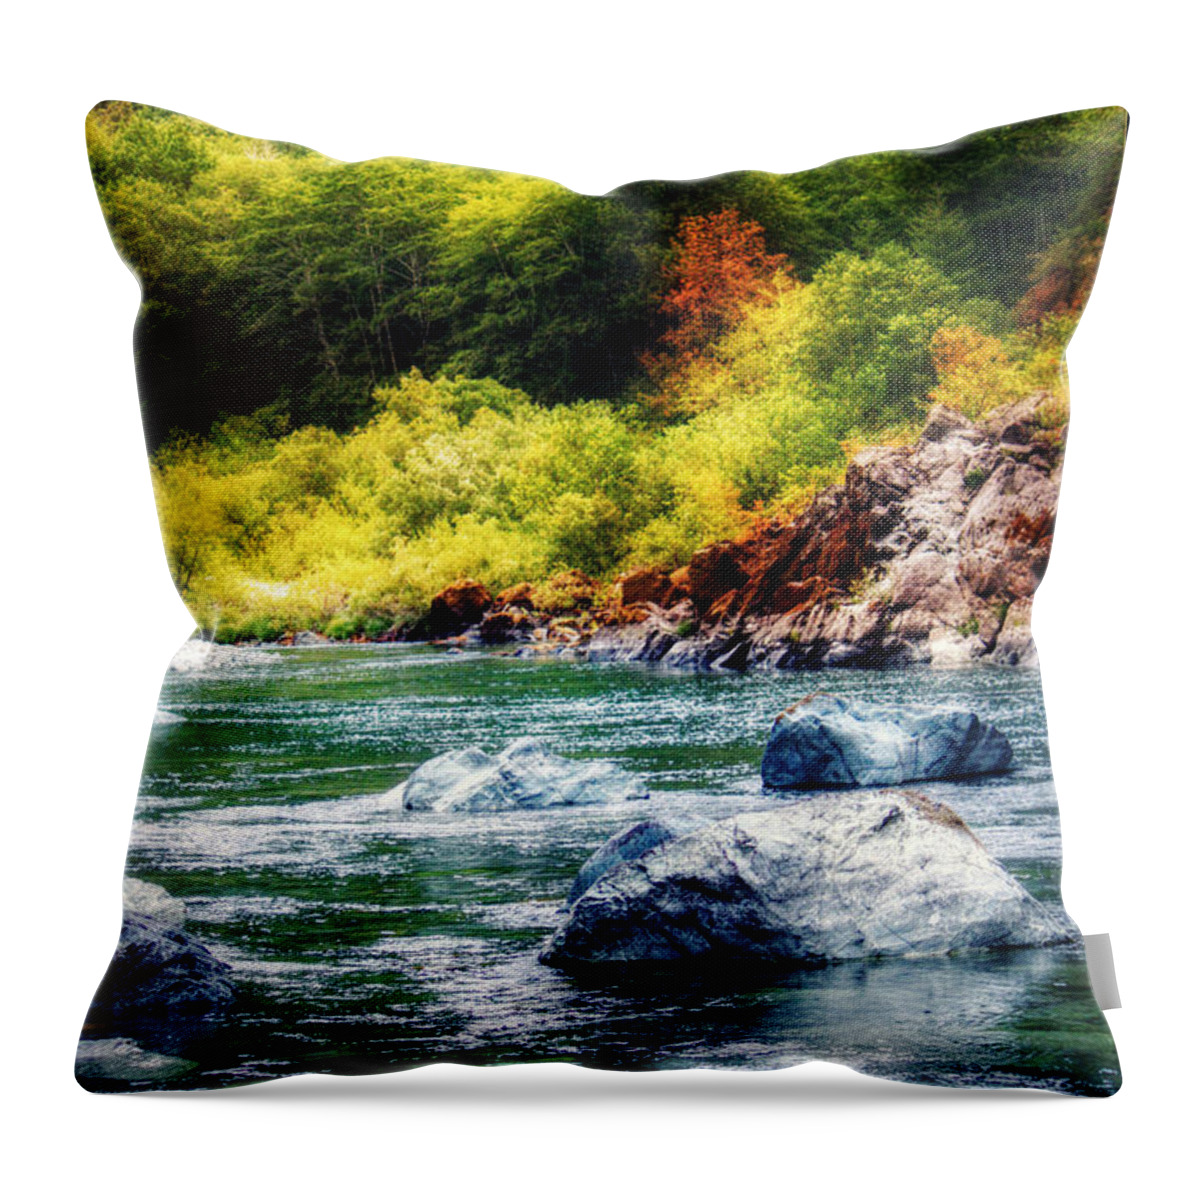 Smith River Throw Pillow featuring the photograph Smith River in Autumn by Melanie Lankford Photography